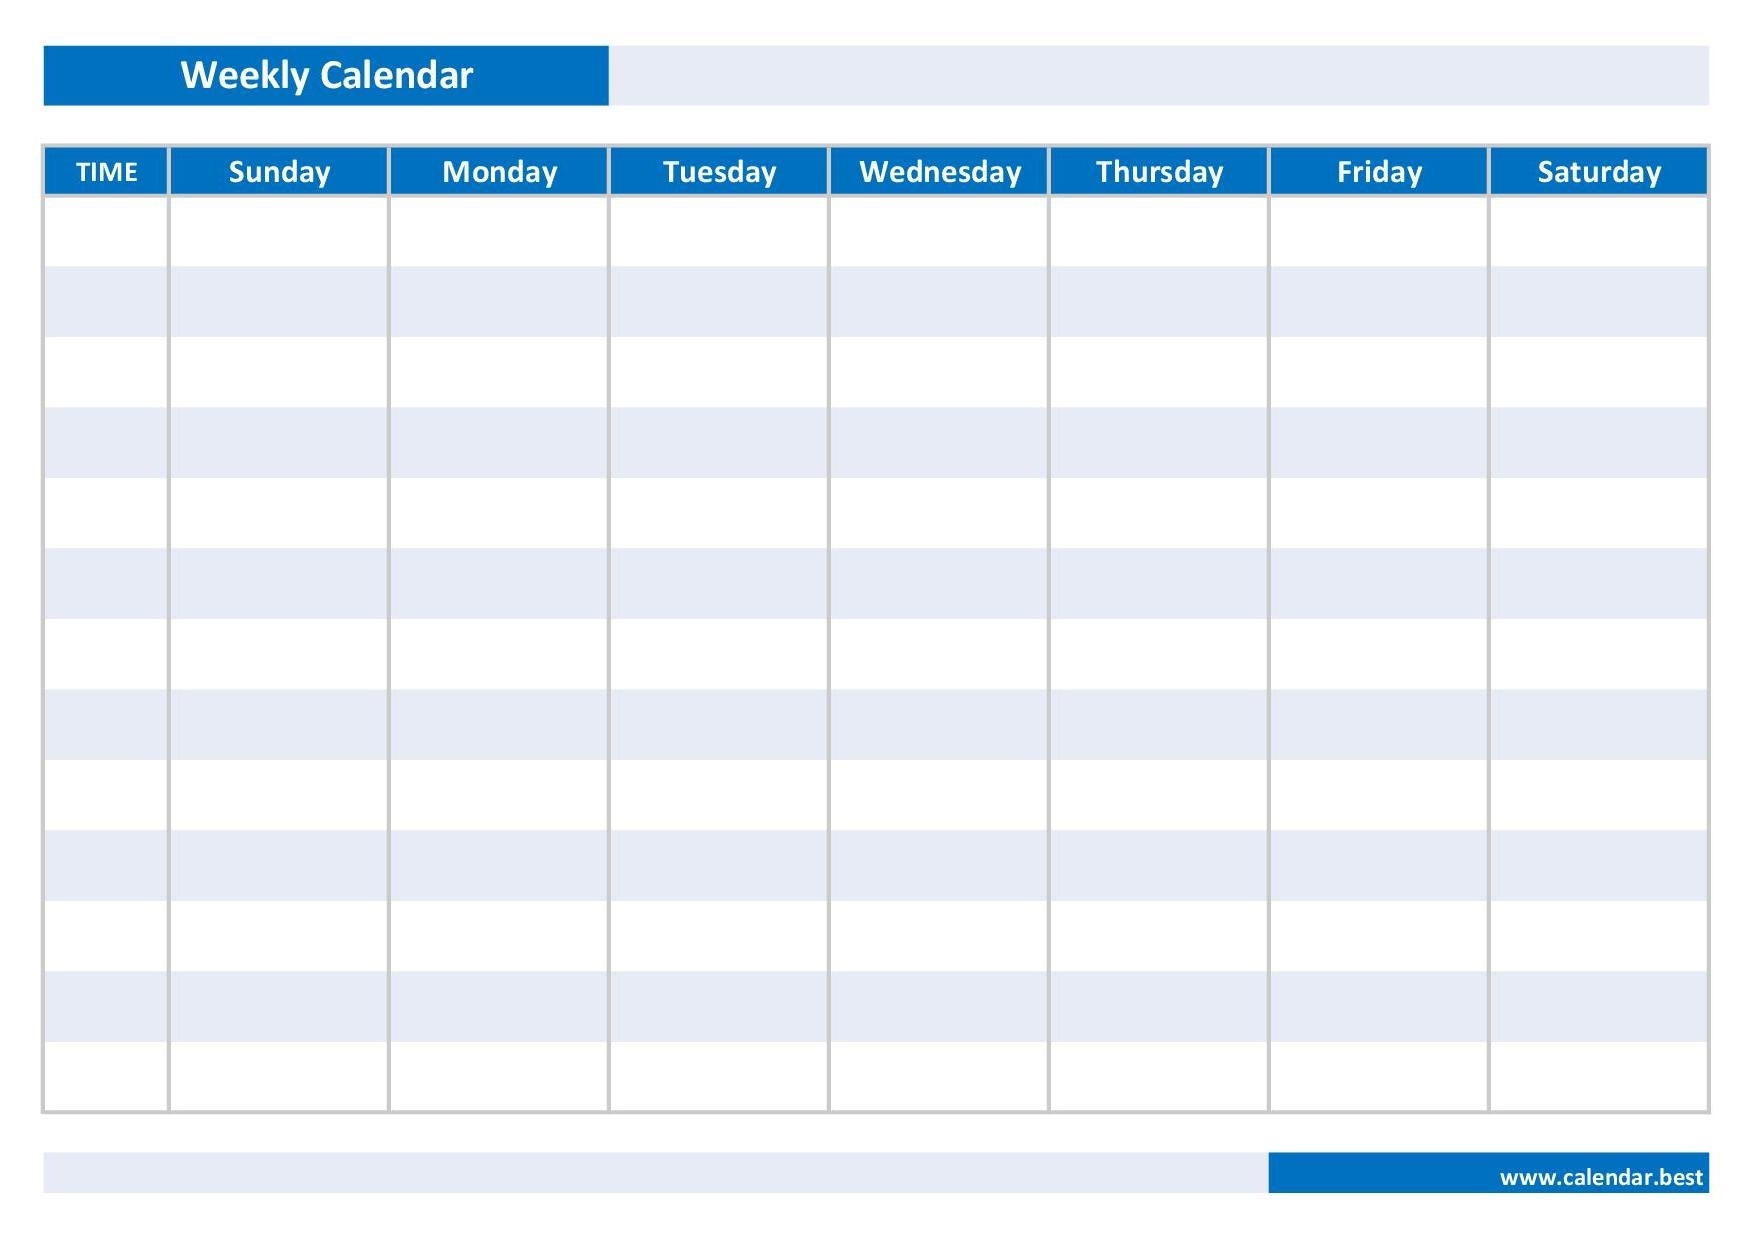 Take Weekly Schedule With Time Slots